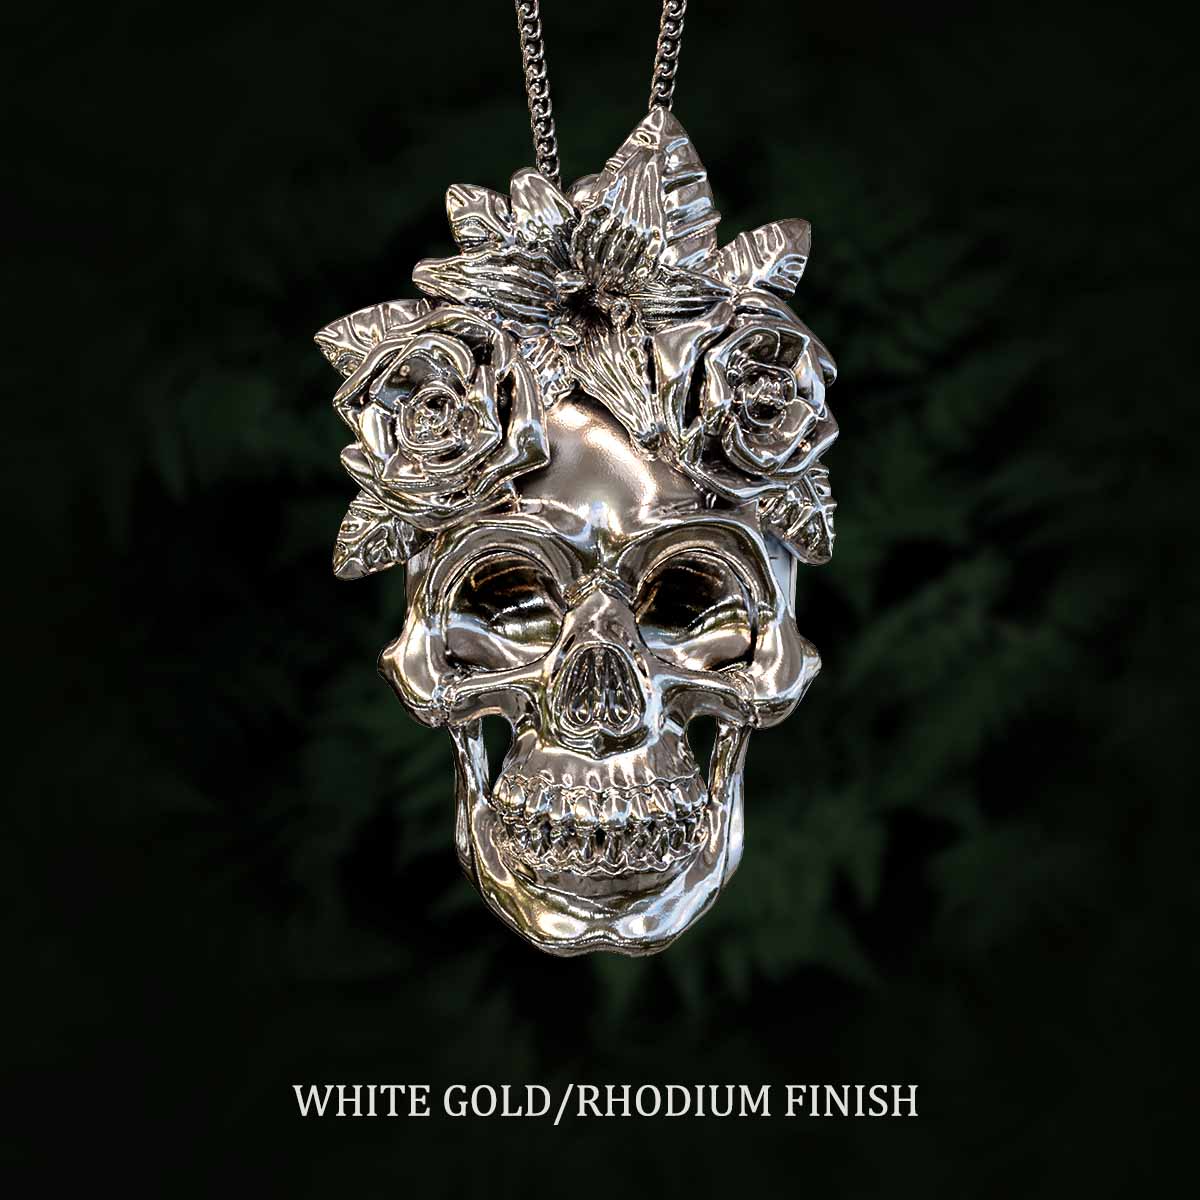     White-Gold-Rhodium-Finish-Human-Skull-and-Flowers-Pendant-Jewelry-For-Necklace